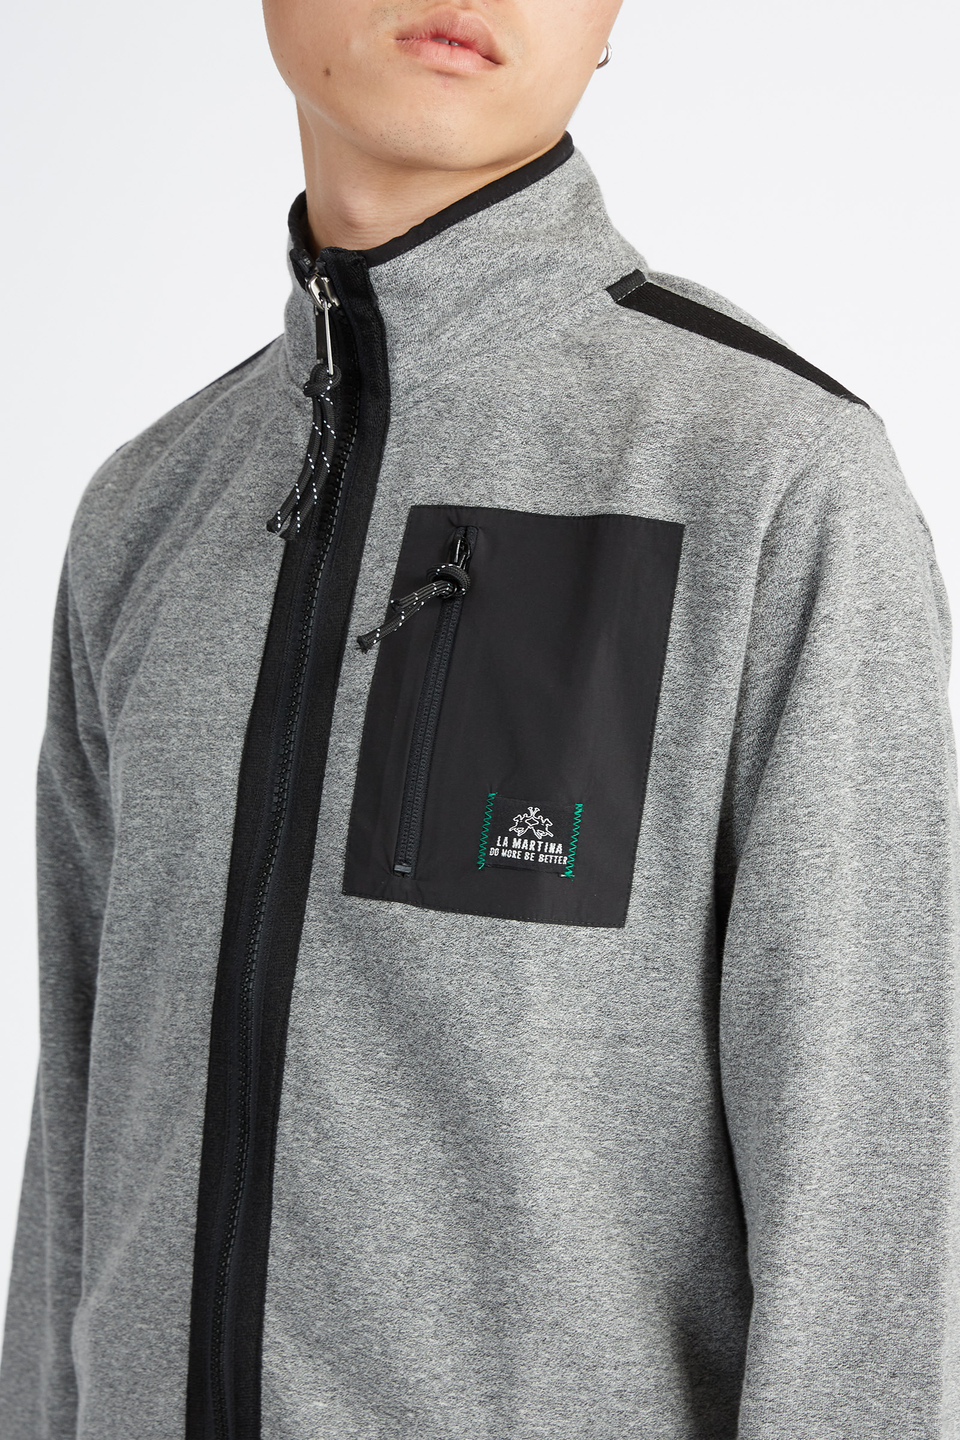 Men's two-tone capsule sweatshirt with logos, stand-up collar, full zip and front pocket - Vani | La Martina - Official Online Shop